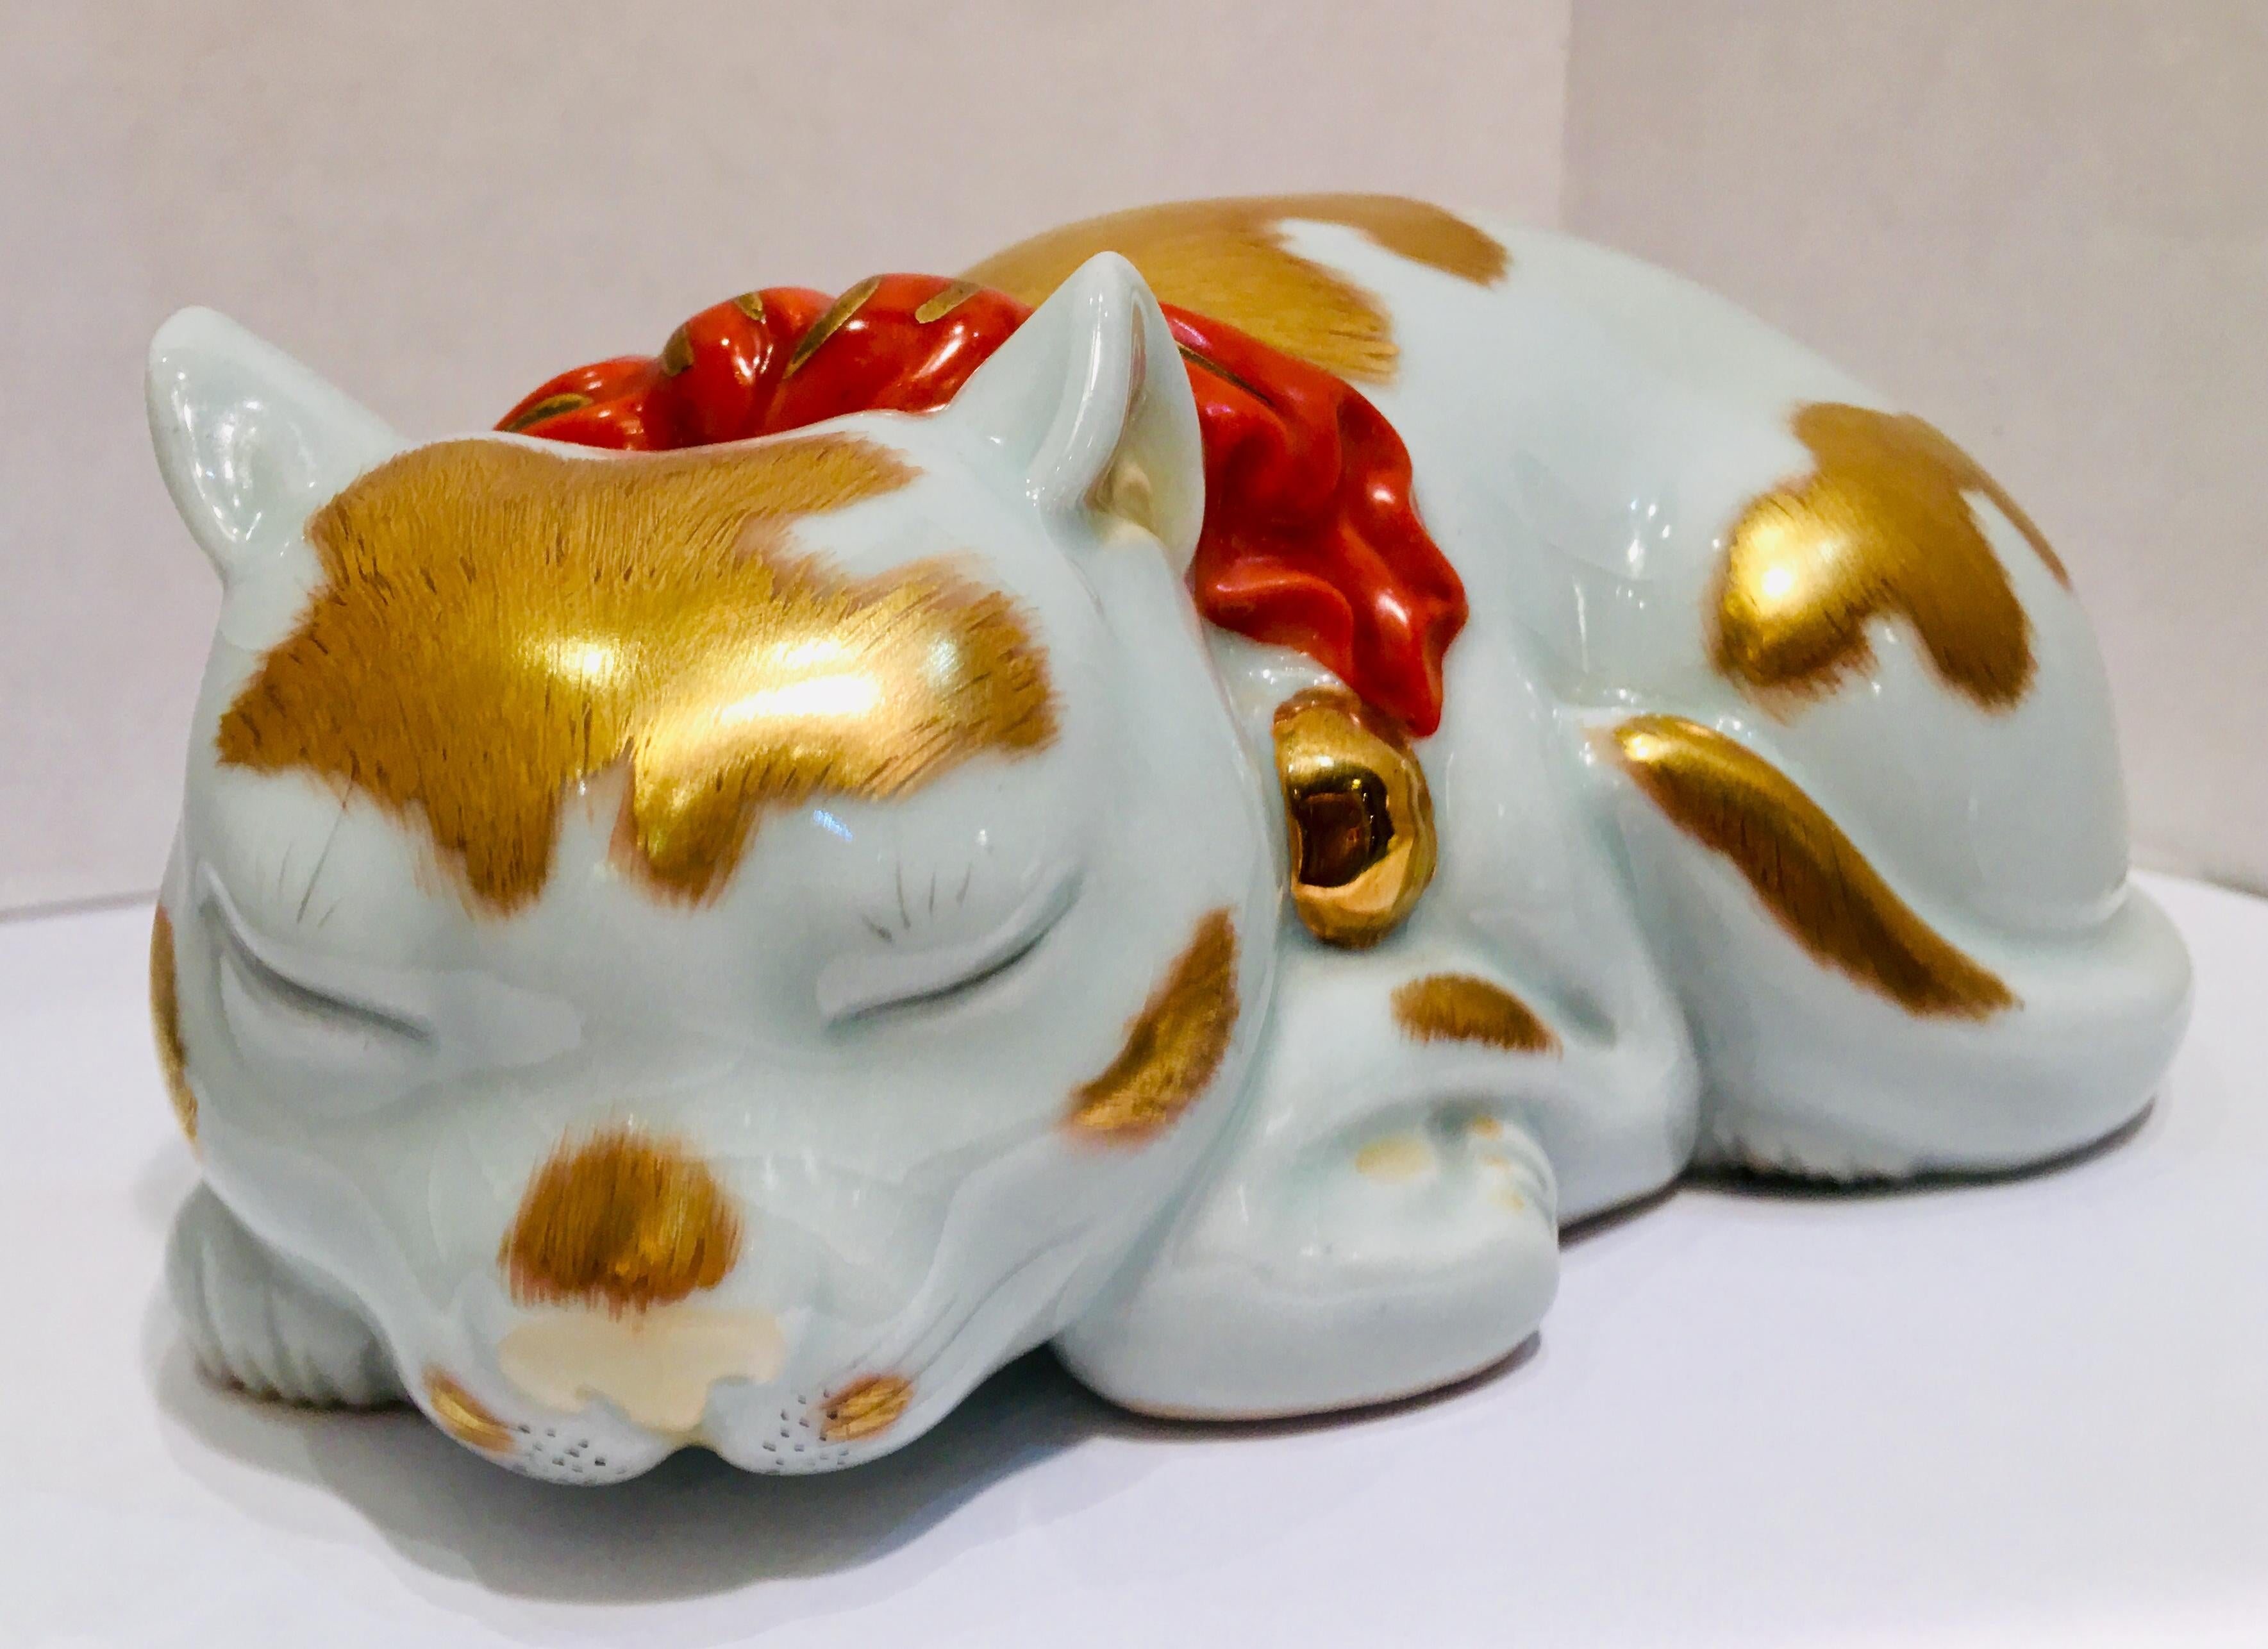 Very precious Kutani Japanese fine porcelain figurine of a curled up, peacefully sleeping small cat or kitten with crackled white glazed finish is lavishly hand painted in 24-karat gold and features a large orange and gold bow with gold